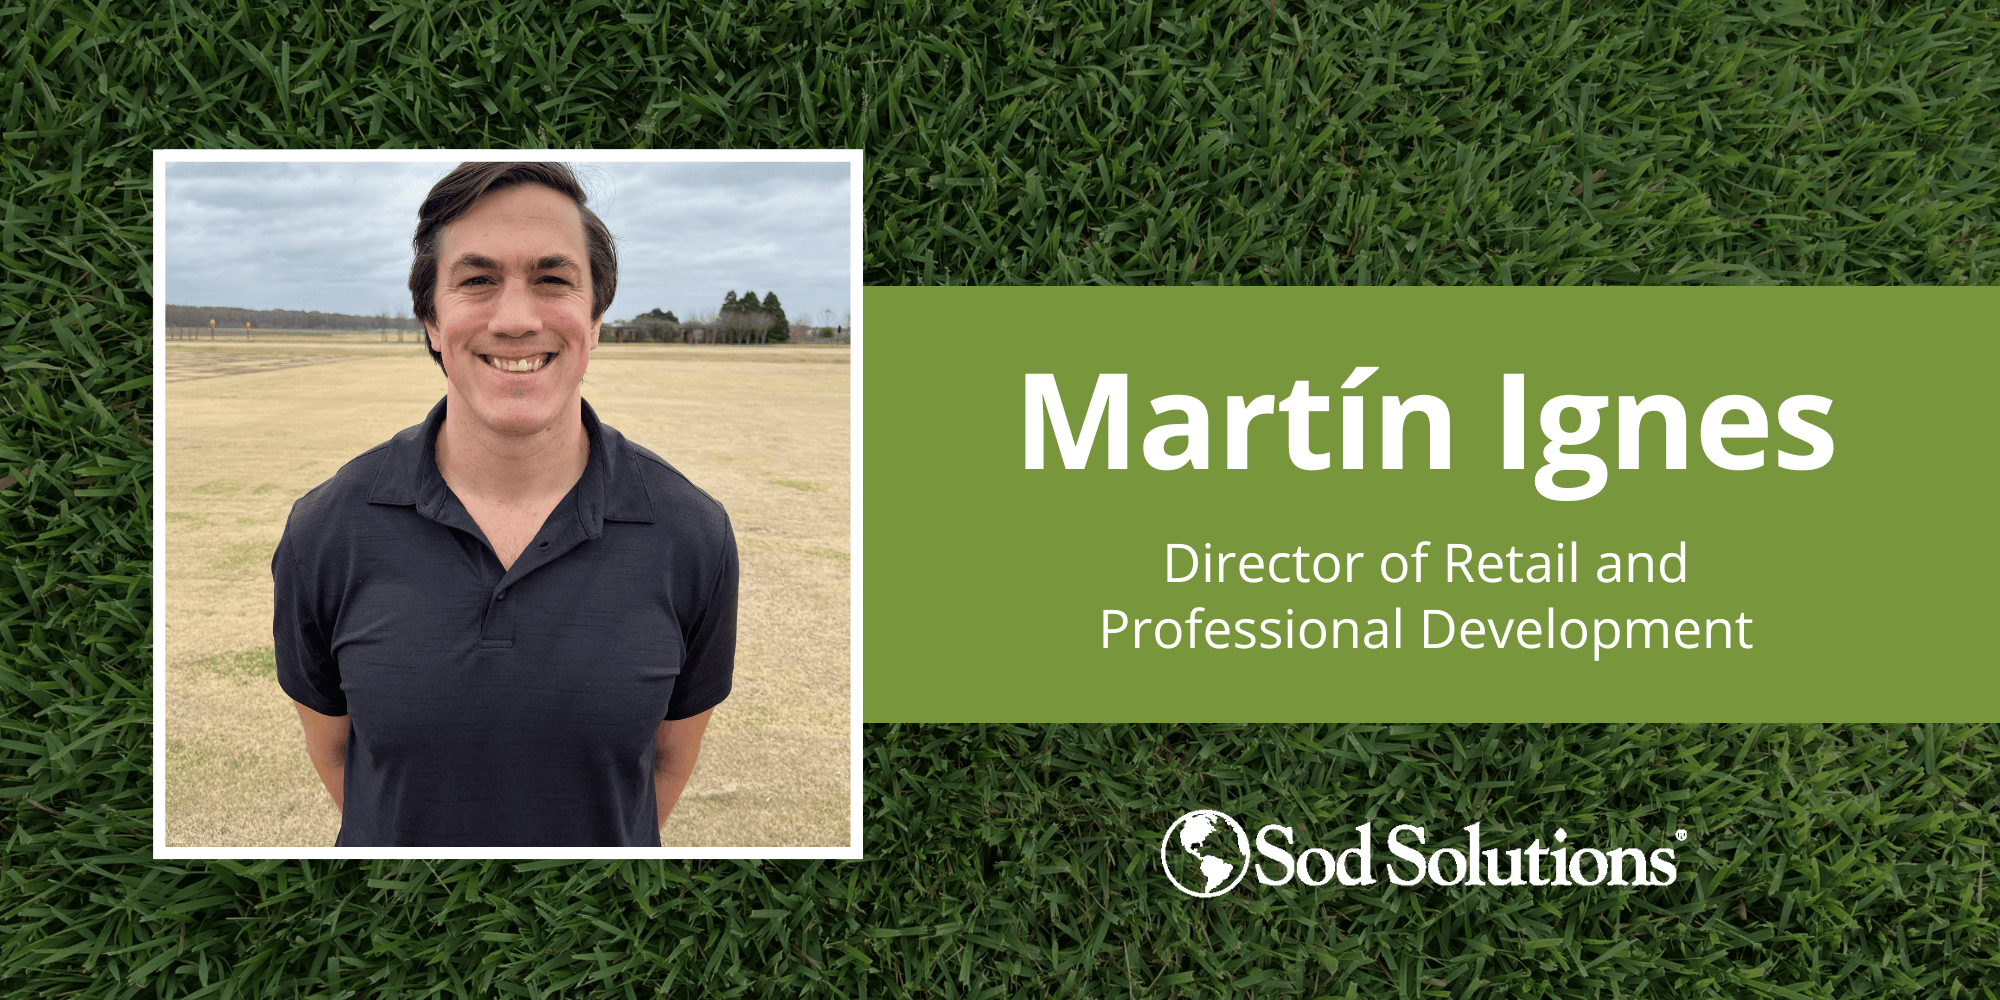 Sod Solutions Welcomes Martín Ignes